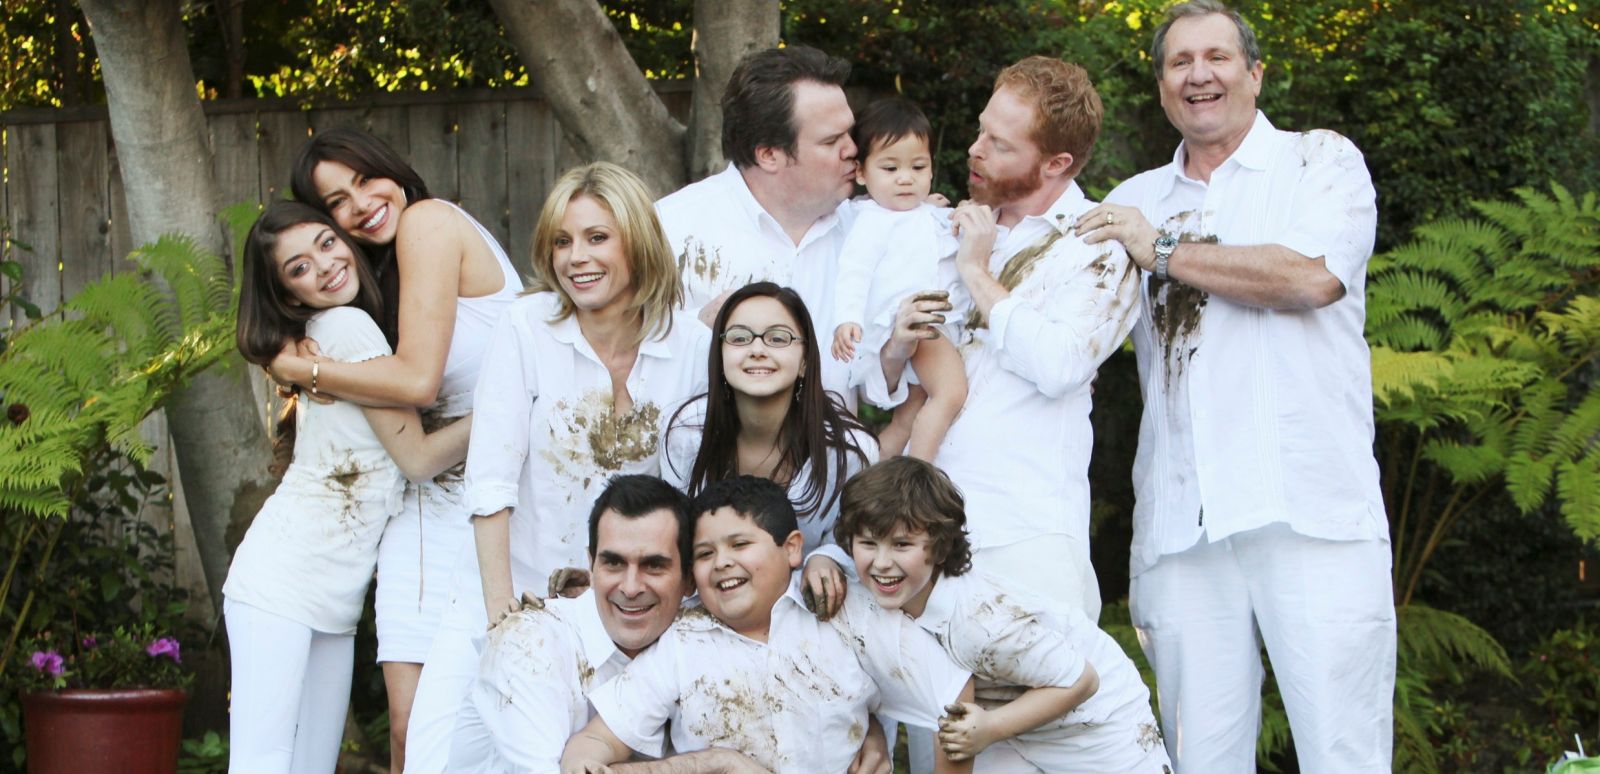 A Comedic Spin on Regular Families in “Modern Family”